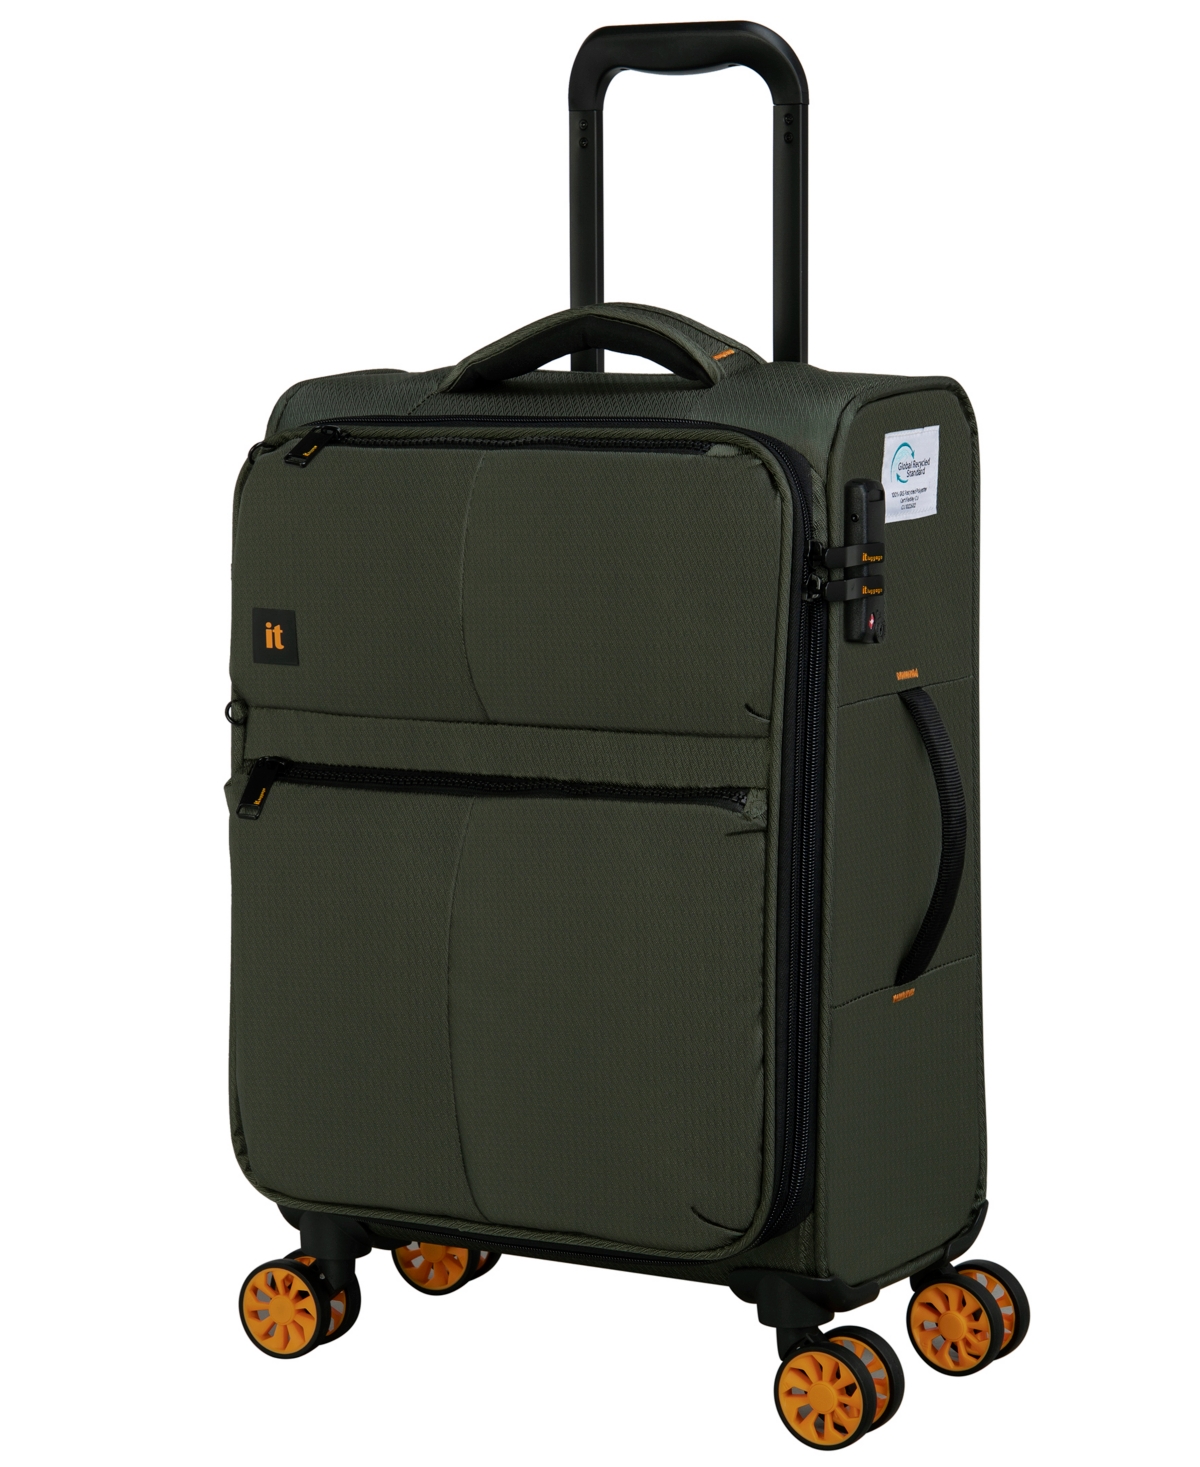 It Luggage Lykke 19" Softside Carry-on 8-wheel Spinner In Rifle Green